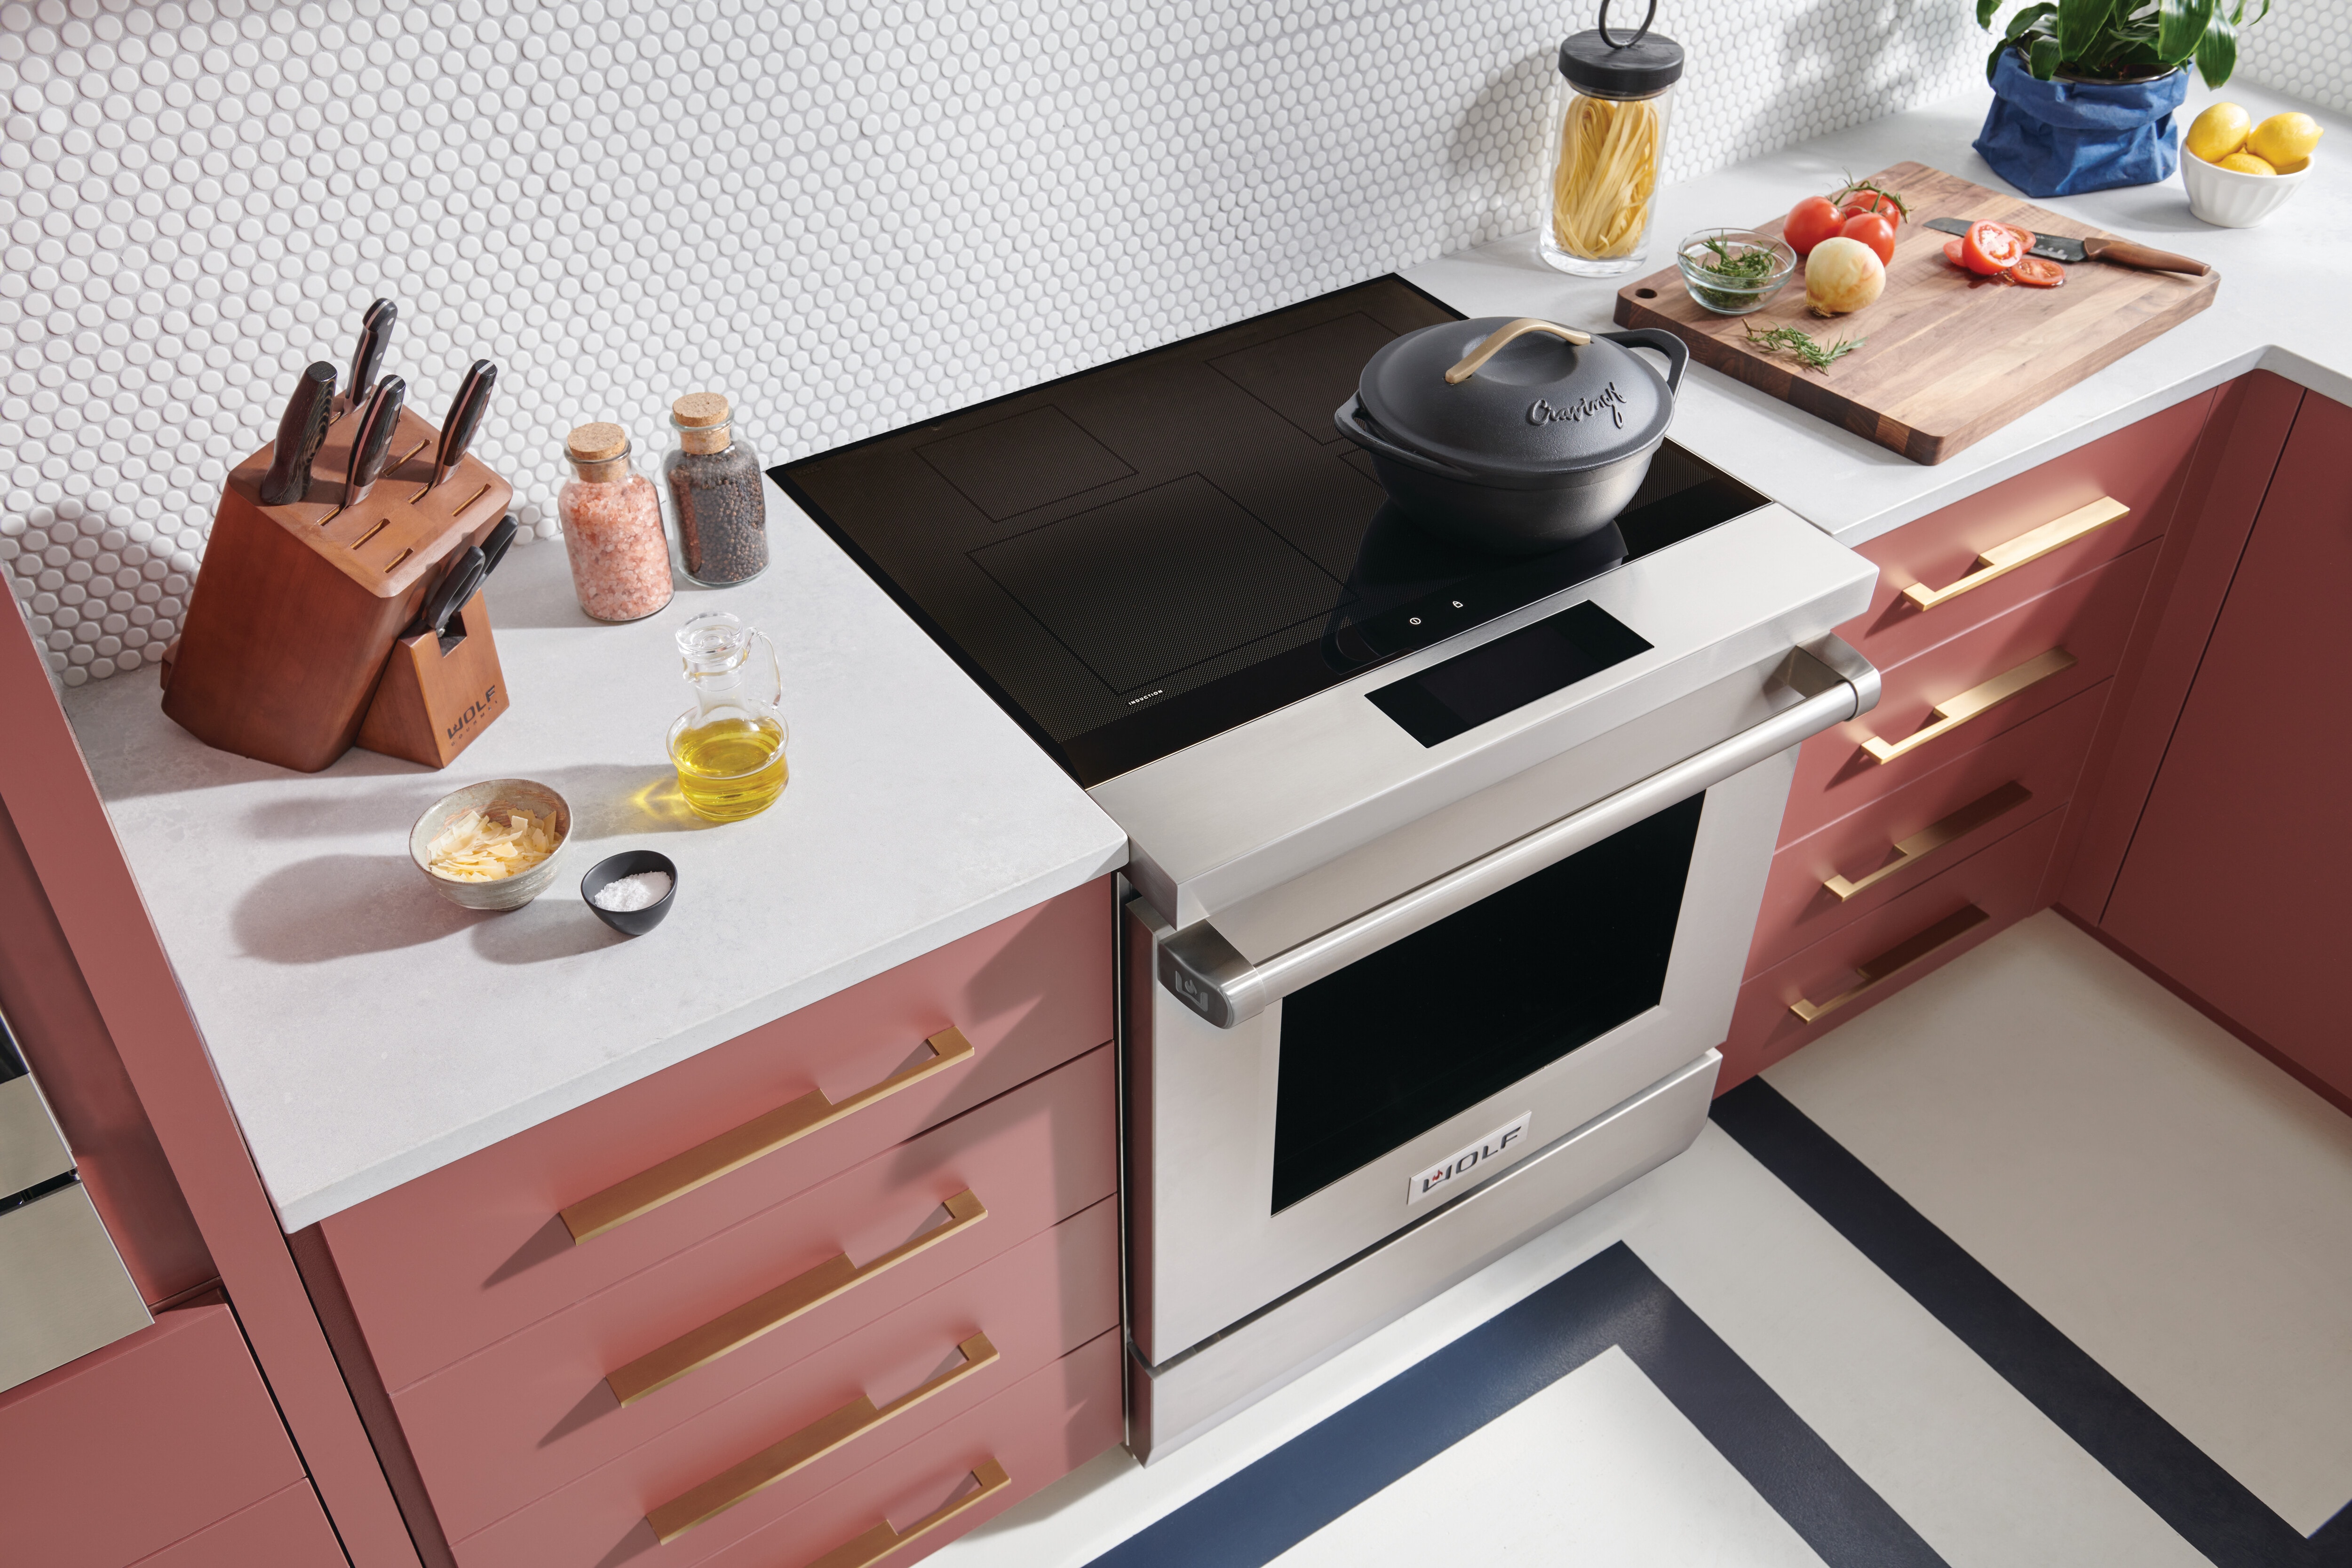 Wolf 36" Induction Range (IR36550/S/T) is sophisticated, energy efficient and easy to clean..